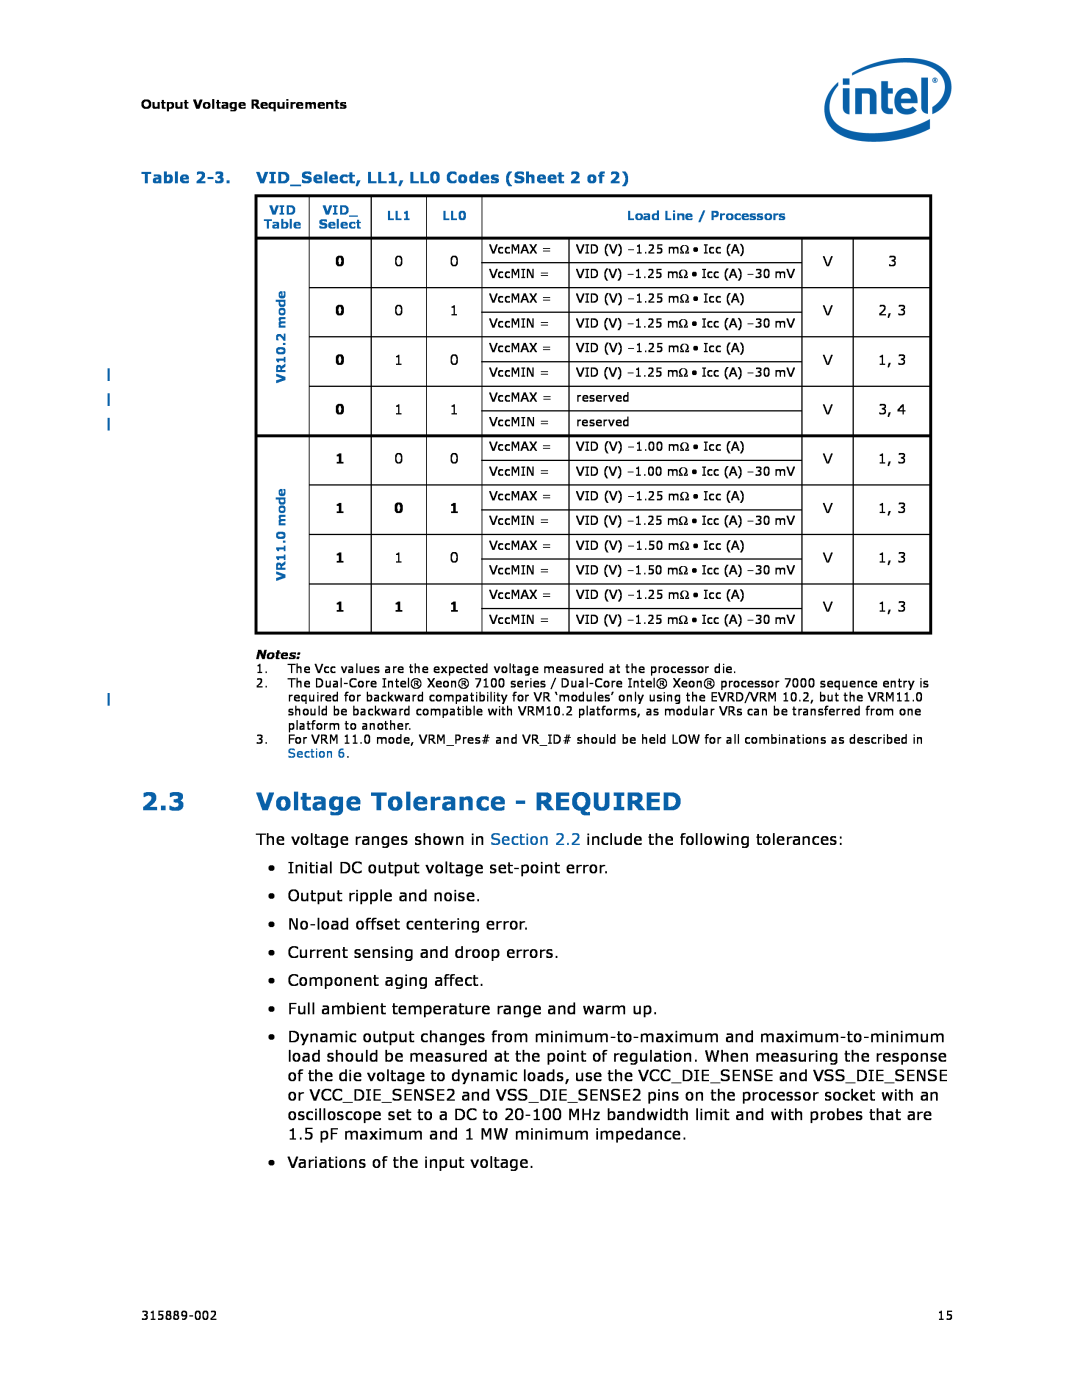 Intel 315889-002 manual 2.3Voltage Tolerance - REQUIRED, 3.VID Select, LL1, LL0 Codes Sheet 2 of 